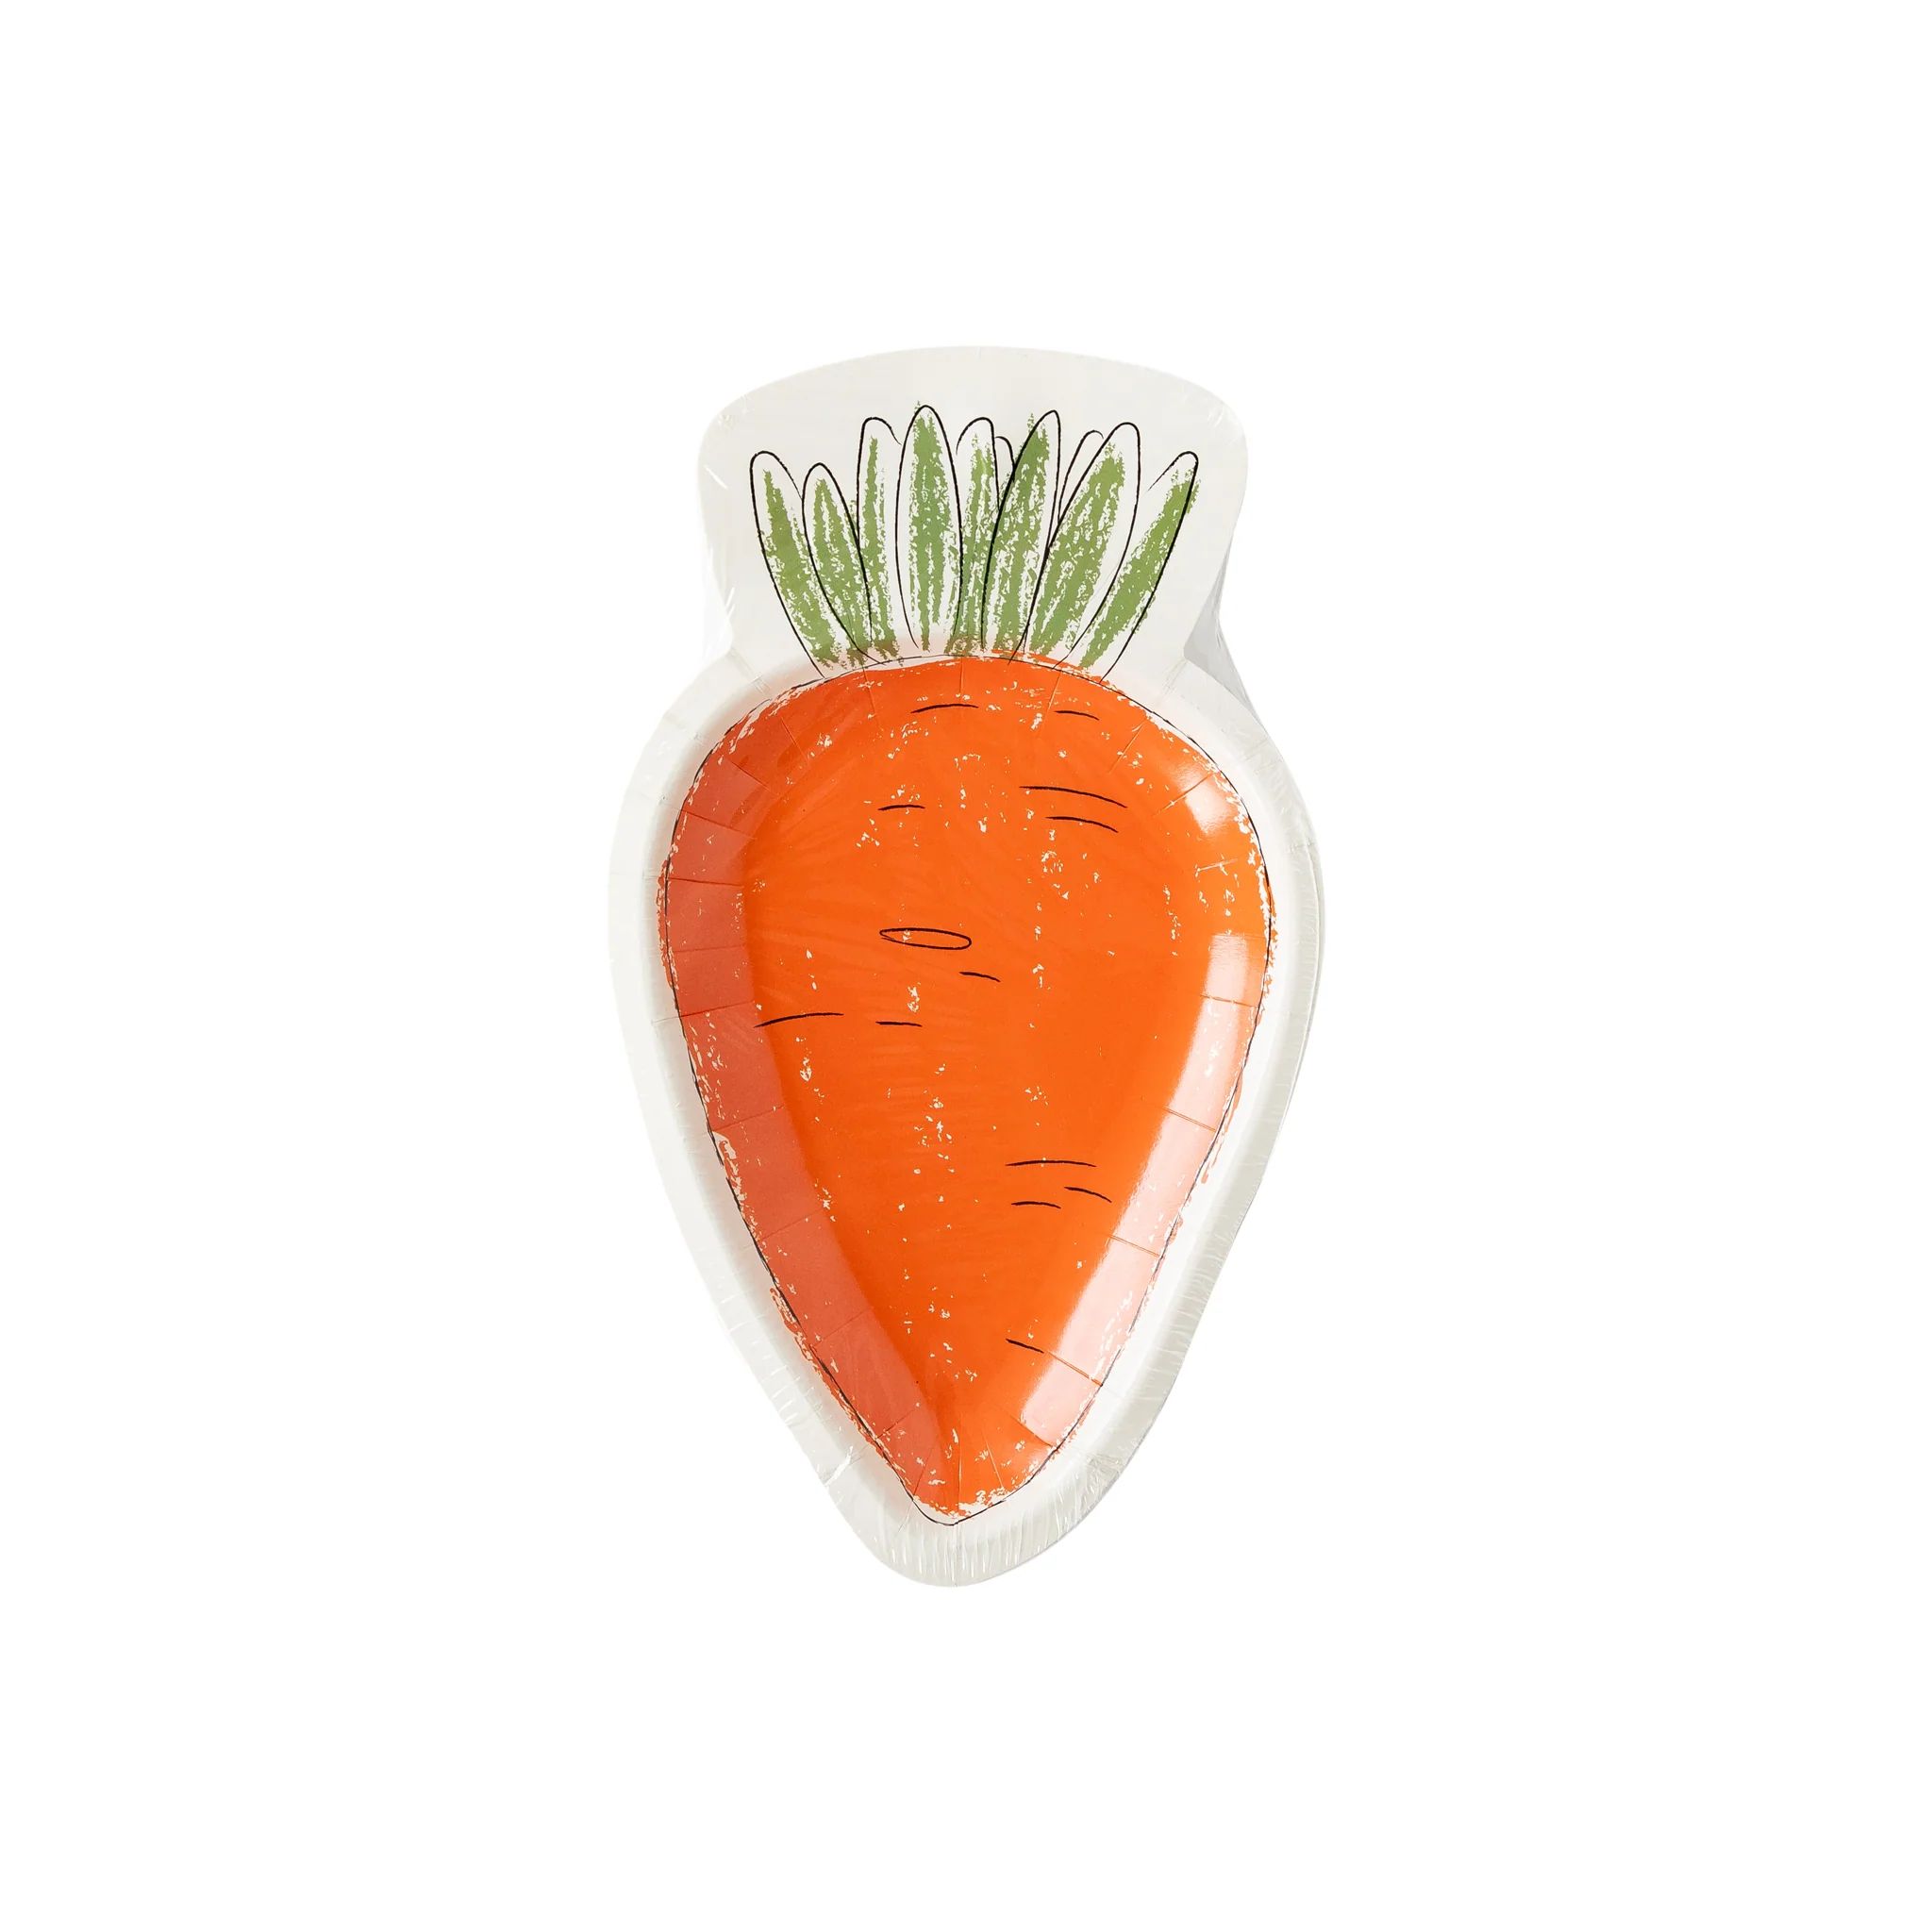 Sketchy Carrot Shaped Plate | My Mind's Eye